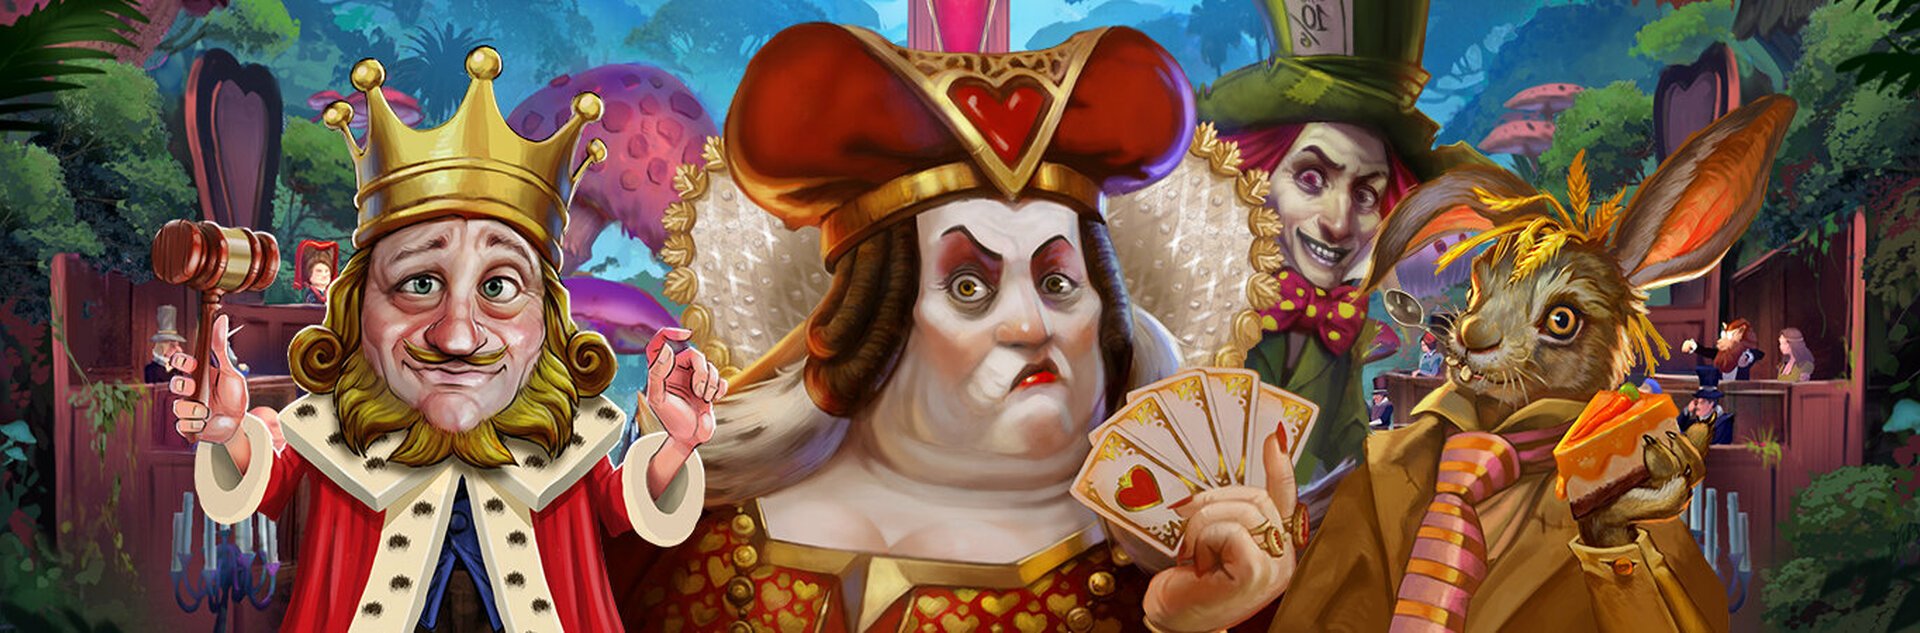 Play Rabbit Hole Riches - Court of Hearts Free Slot